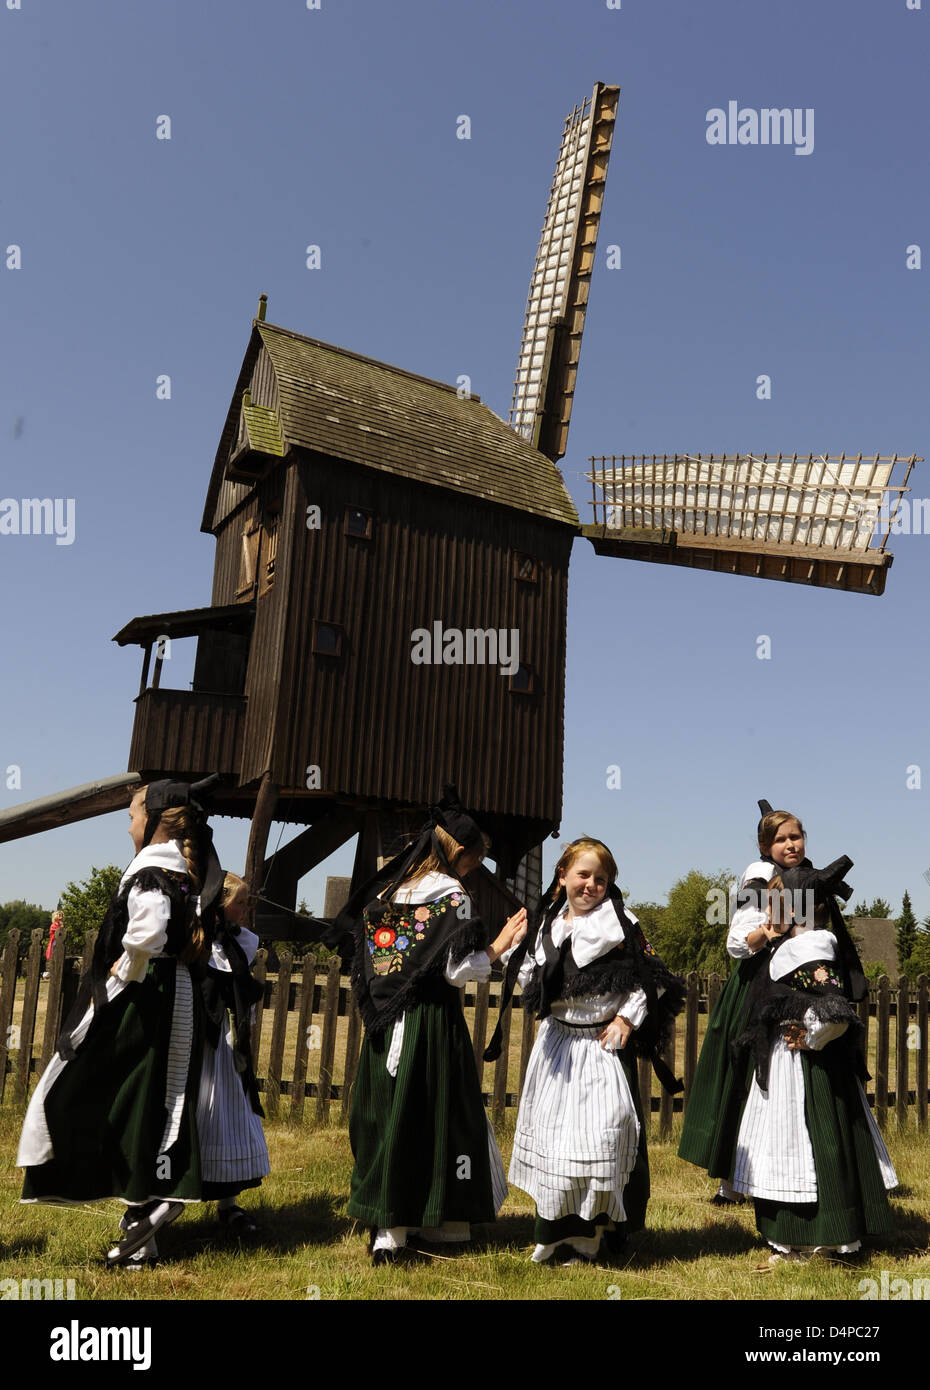 A traditional folklore and dancing group performs in front of a  ?Bockwind?-type mill at the International Mill Museum in Gifhorn, Germany, 01 June 2009. Alltogether 15 full-scale mills and 50 mock ups attracted thousands of spectators. According to operators the museum is the world?s largest of its kind. Photo: Holger Hollemann Stock Photo